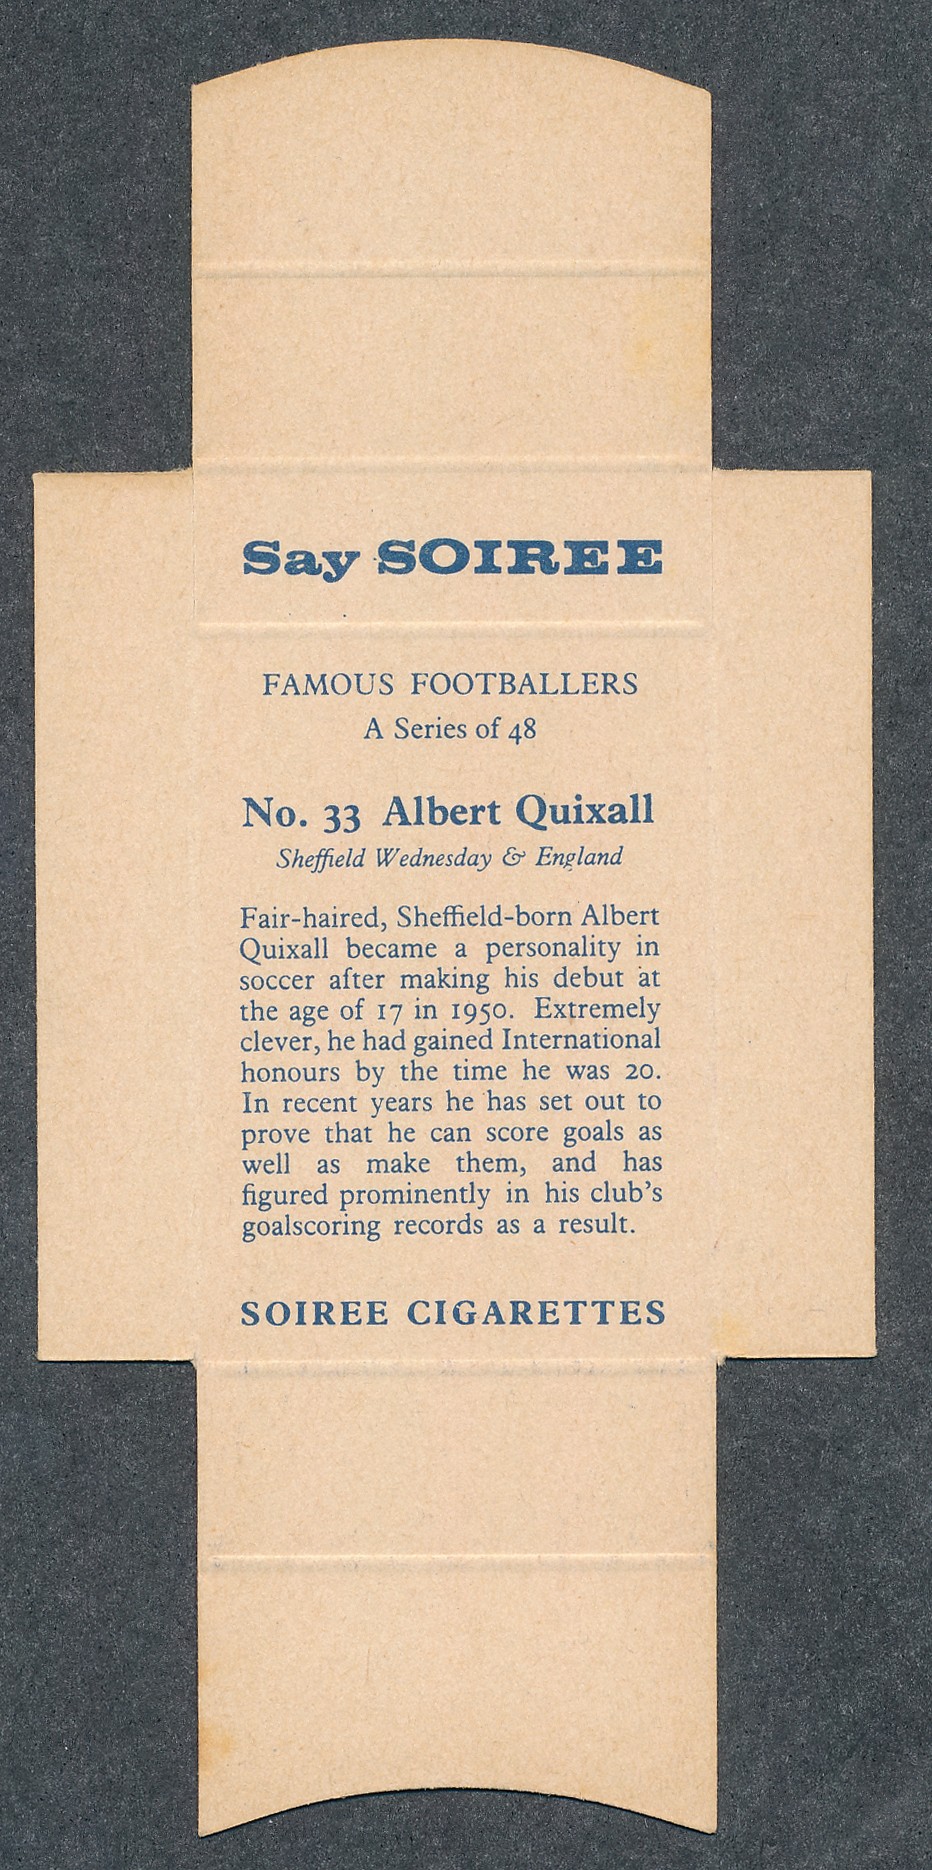 Soiree Cigarettes, Mauritius, Famous Footballers uncut packet issue, No.33 Albert Quixall, Sheffield - Image 2 of 2